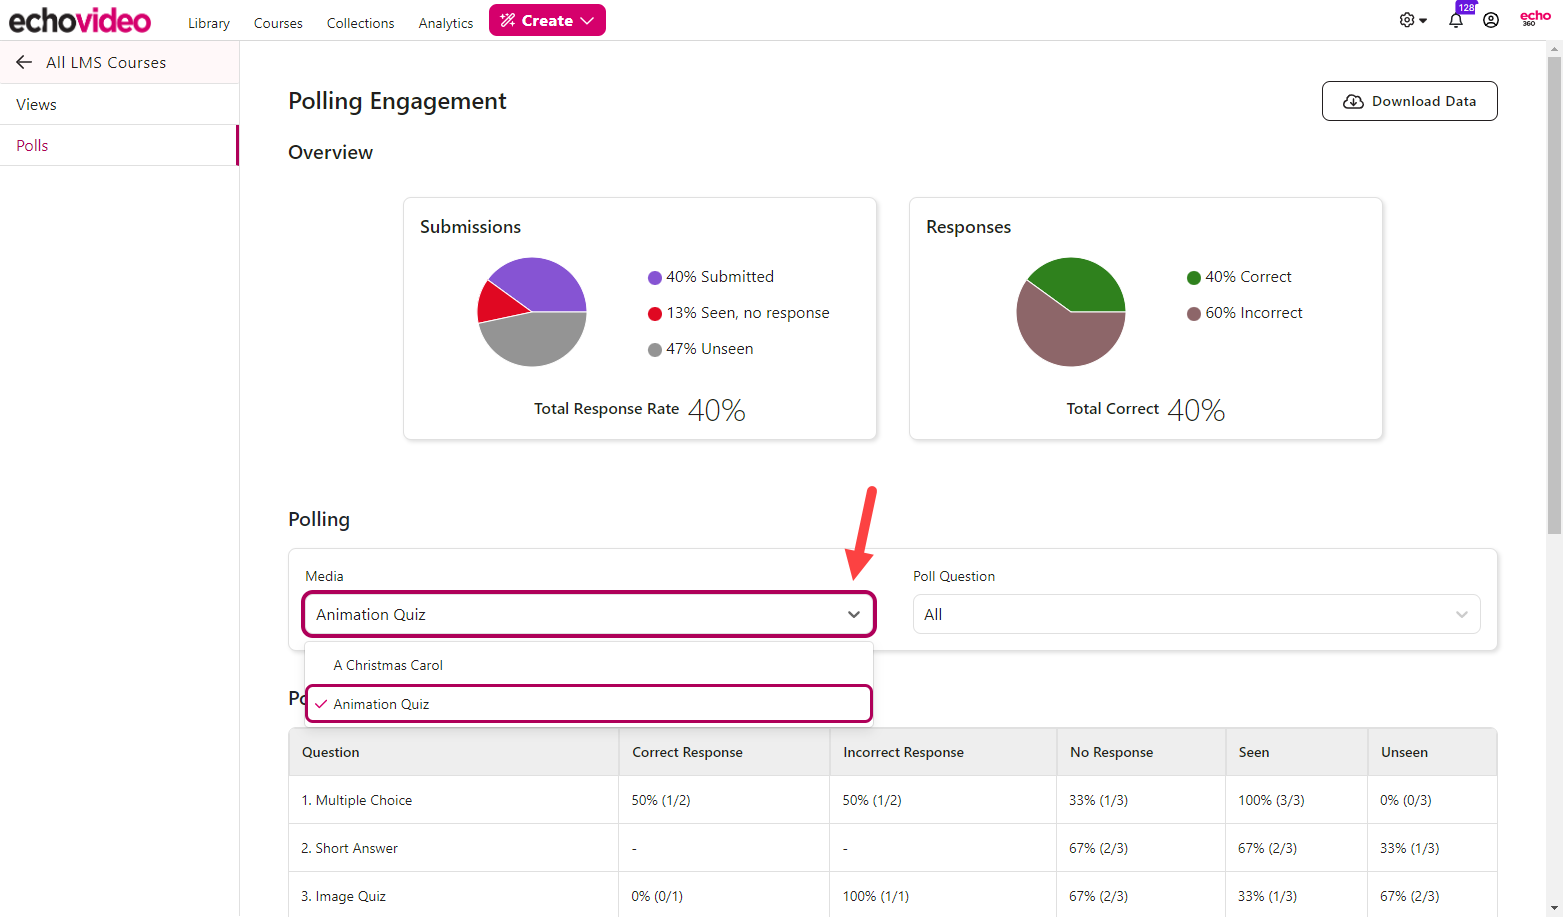 Polls tab of LMS Course analytics page with media drop-down list open showing contents as described